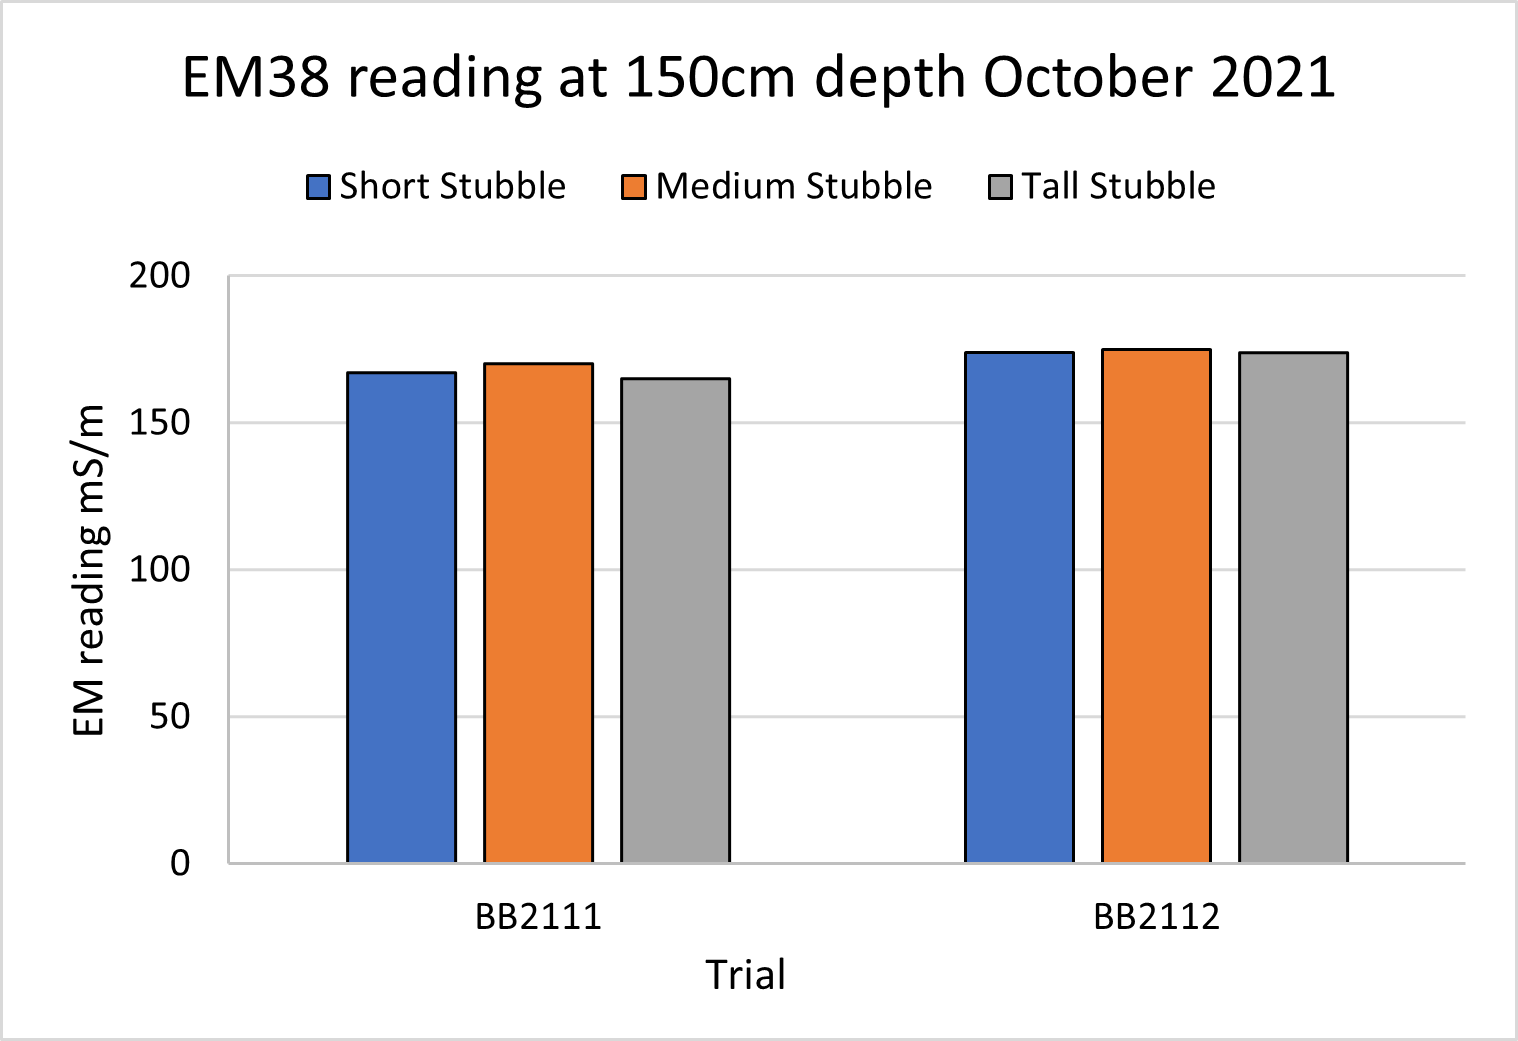 Column graph of EM38 readings at 150cm prior to cotton (October 2021).